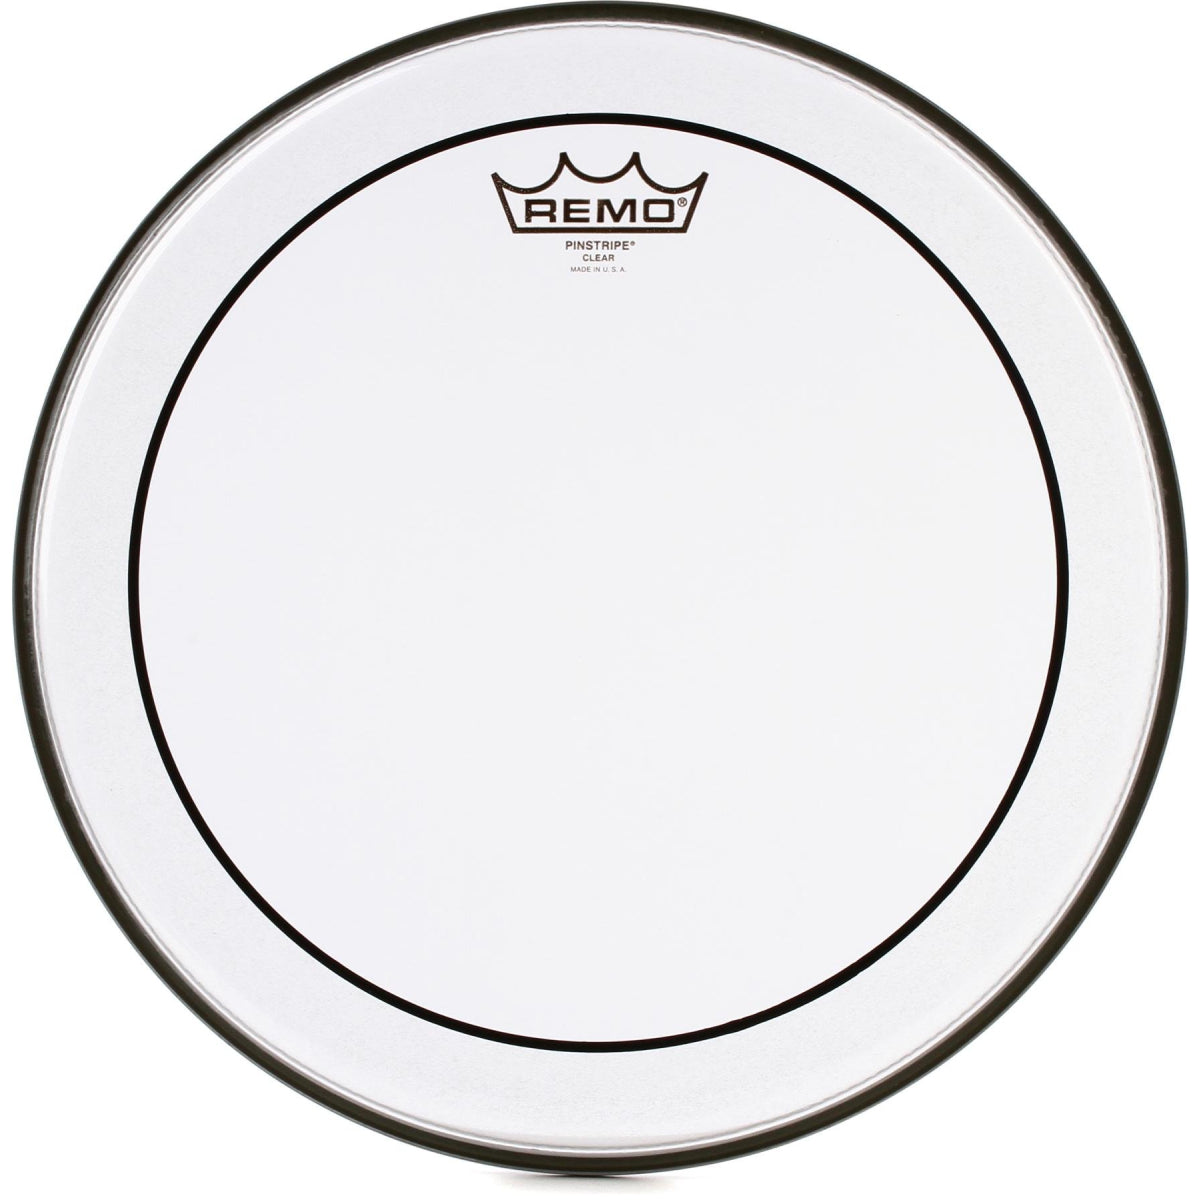 Mặt Trống Remo PS-0313-00 13inch Pinstripe Clear Batter Drum Head - Việt Music